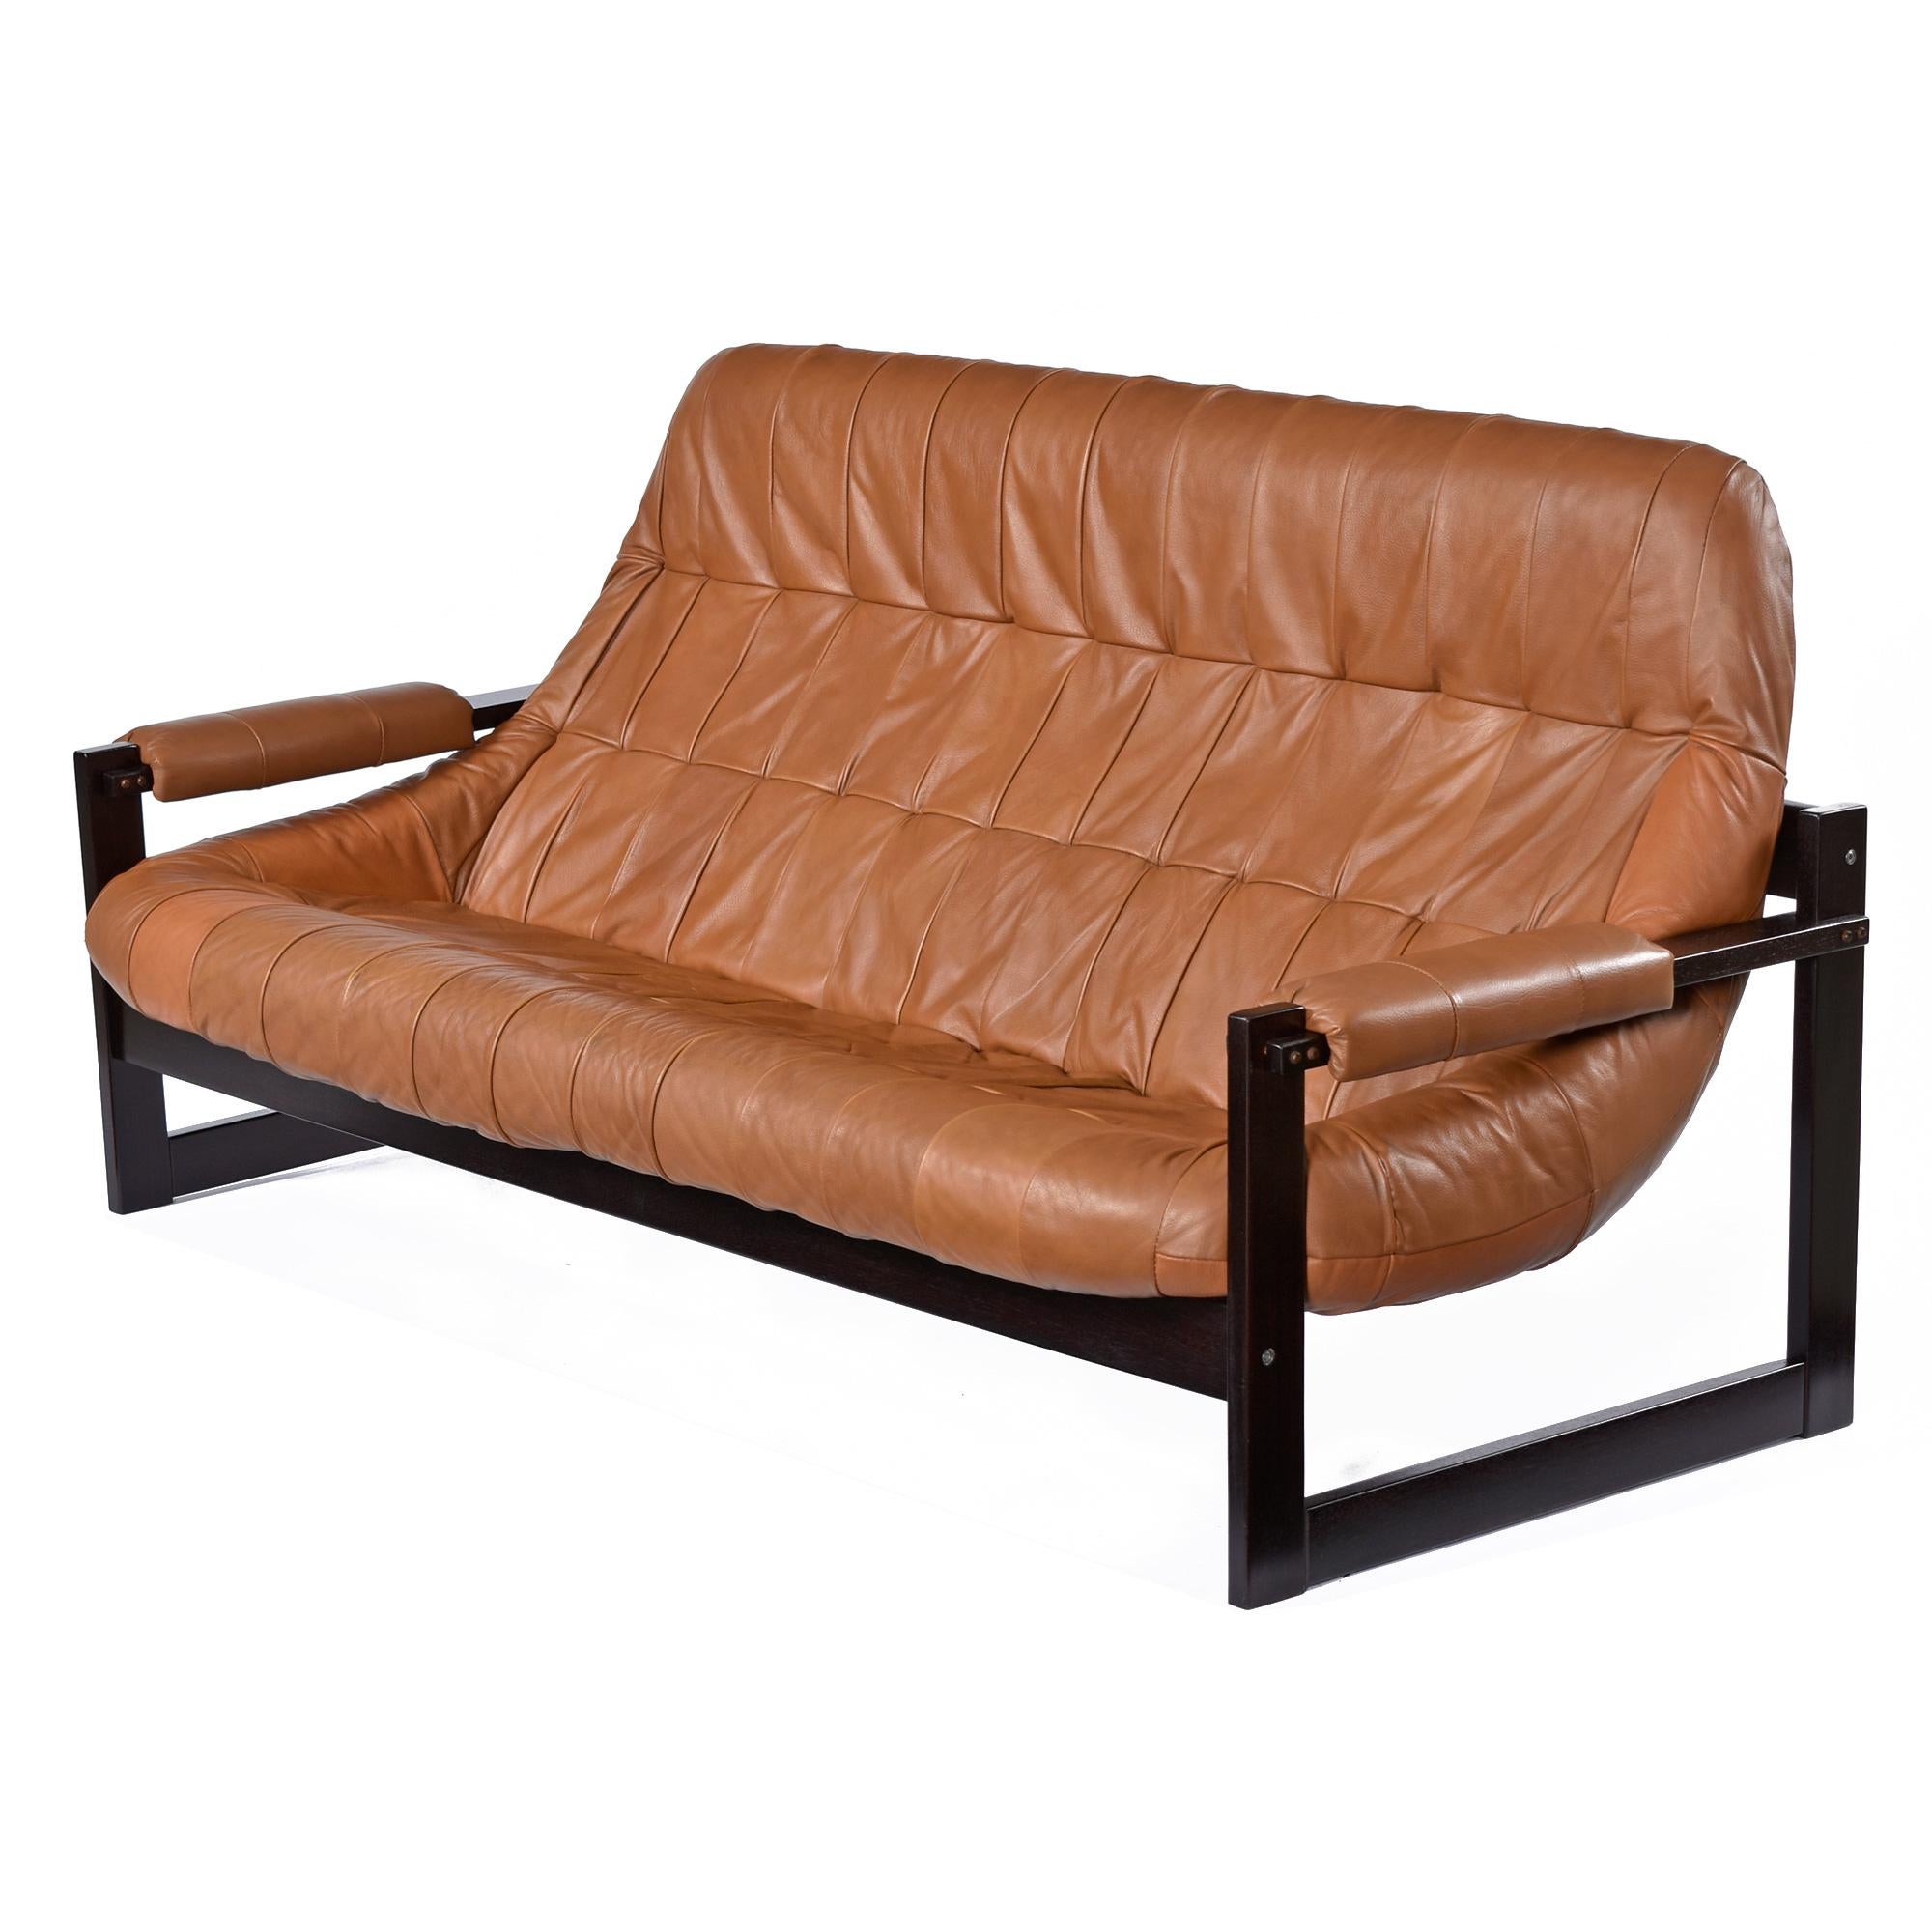 We've had several Percival Lafer sofas and chairs over the years, and this MP-163 